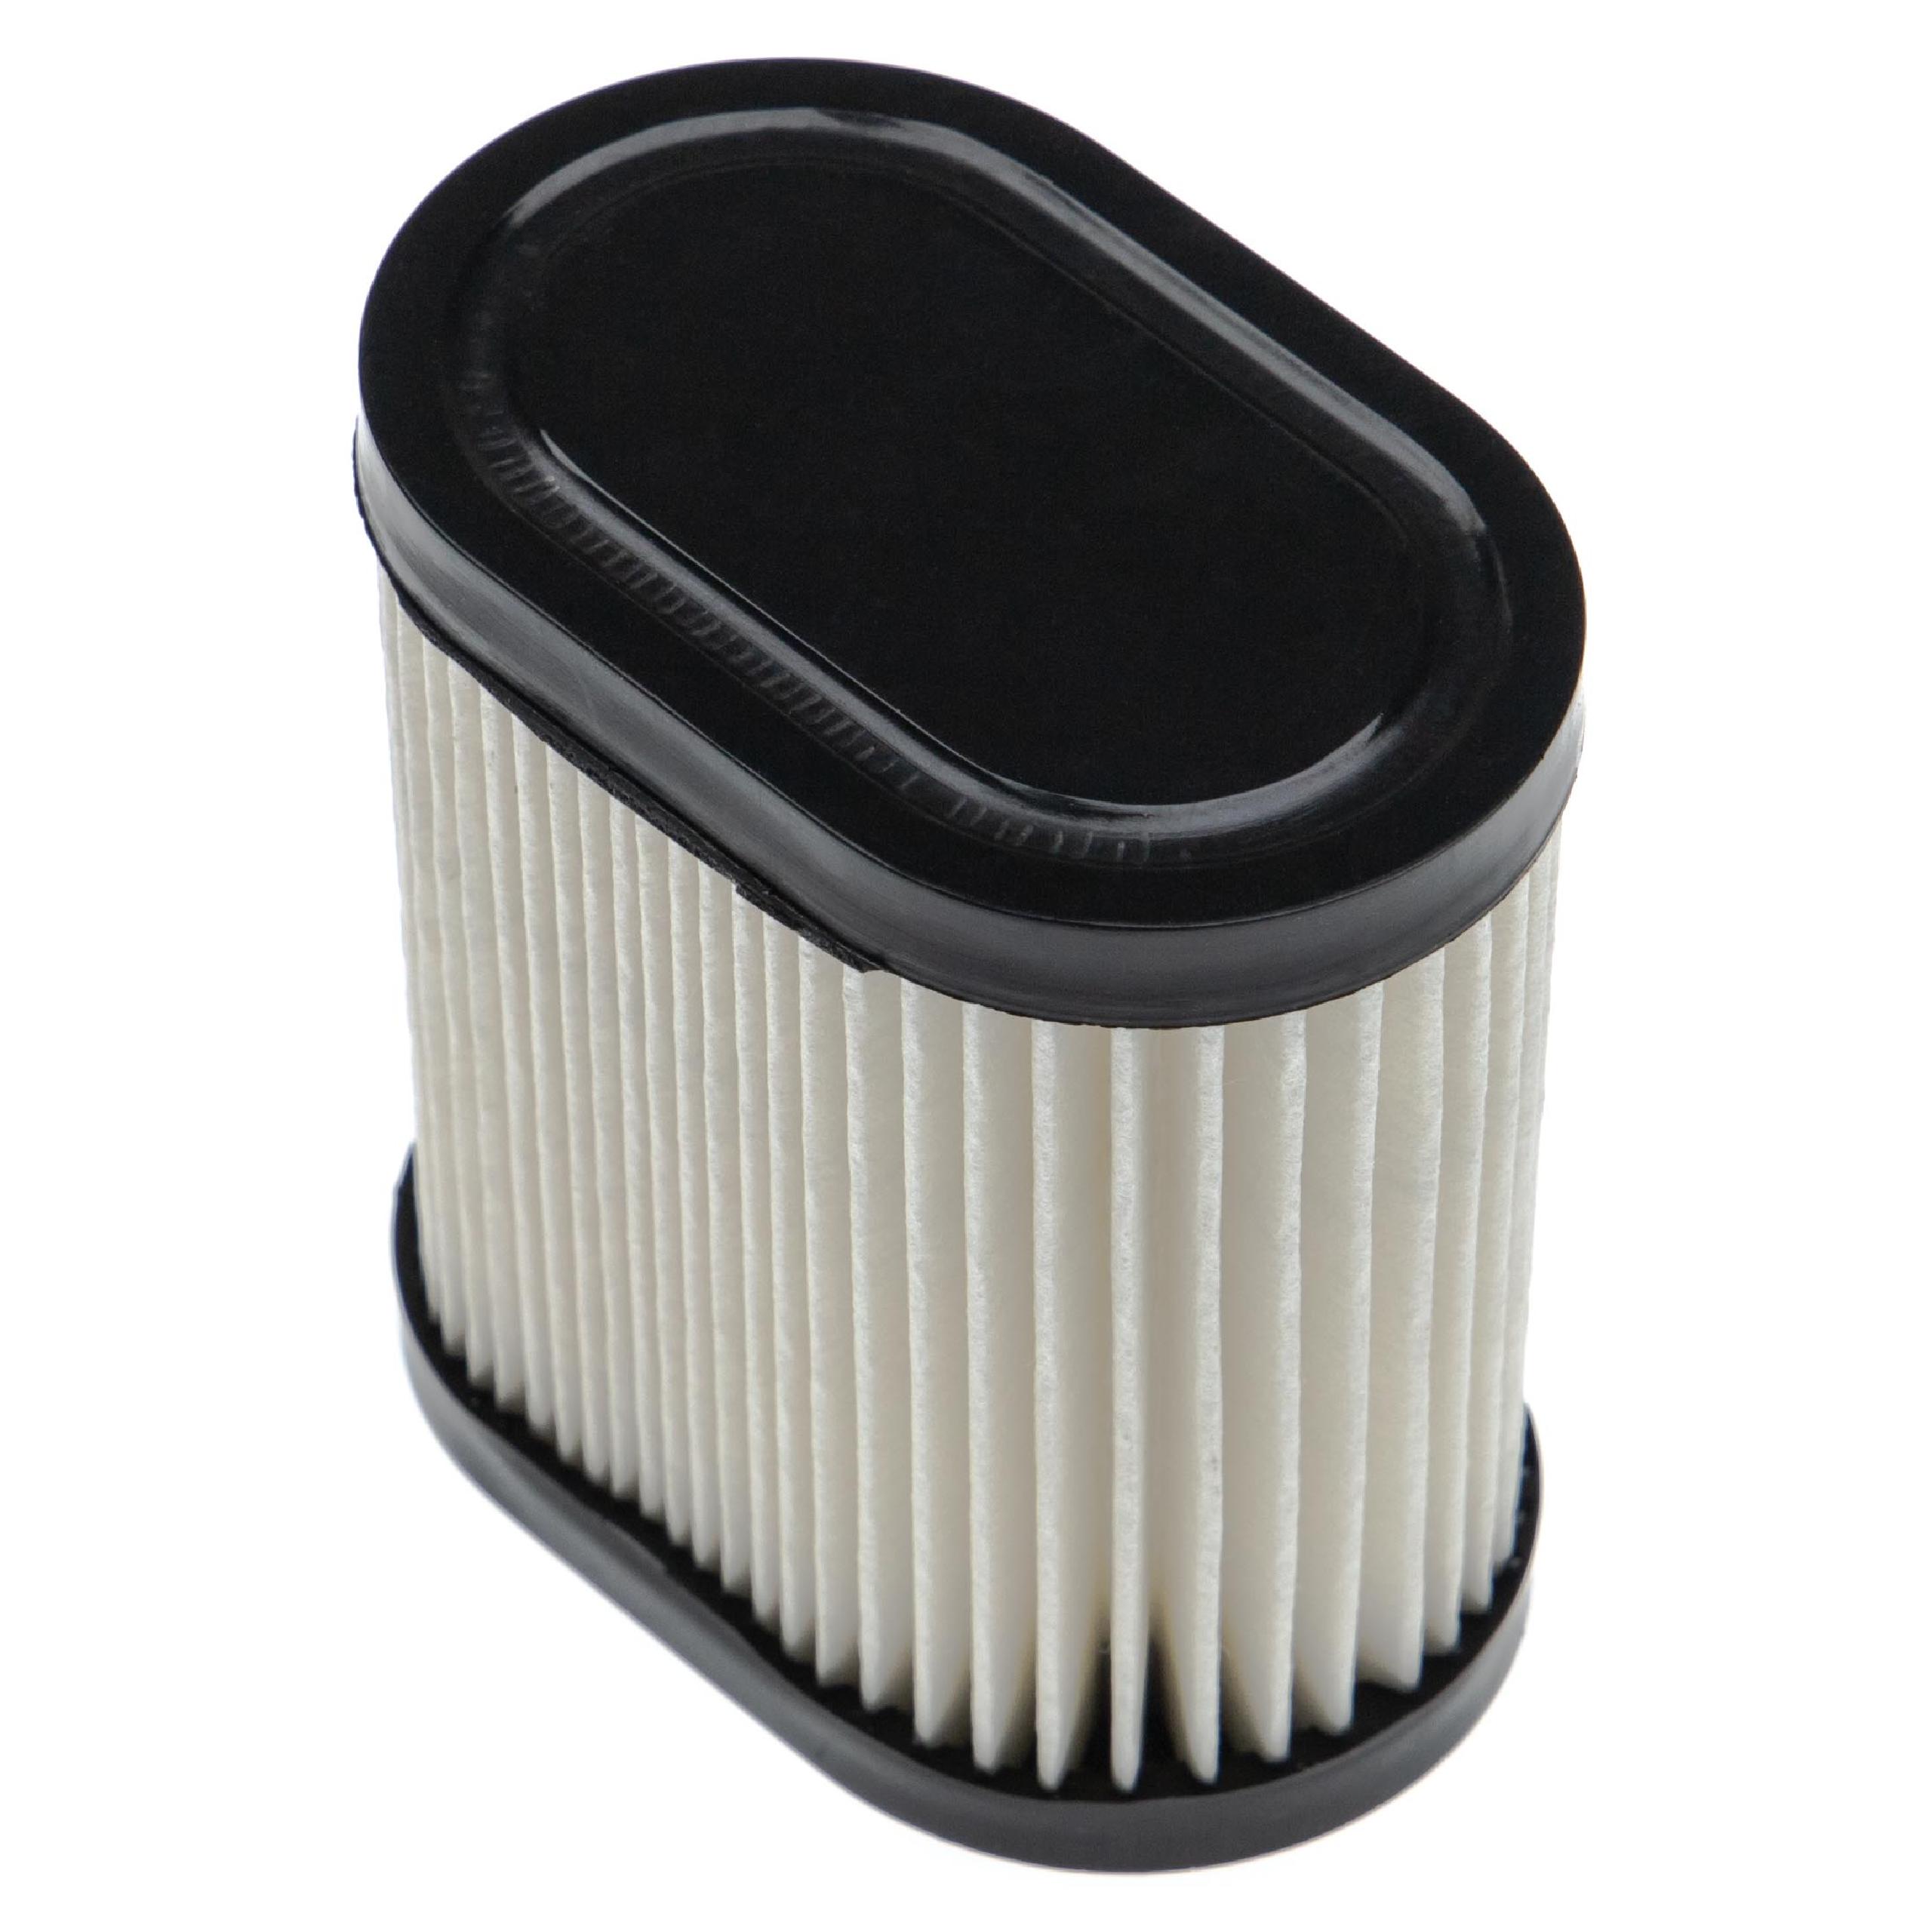 vhbw Replacement Air Filter Replacement for Tecumseh 36905, 740083A for Motor